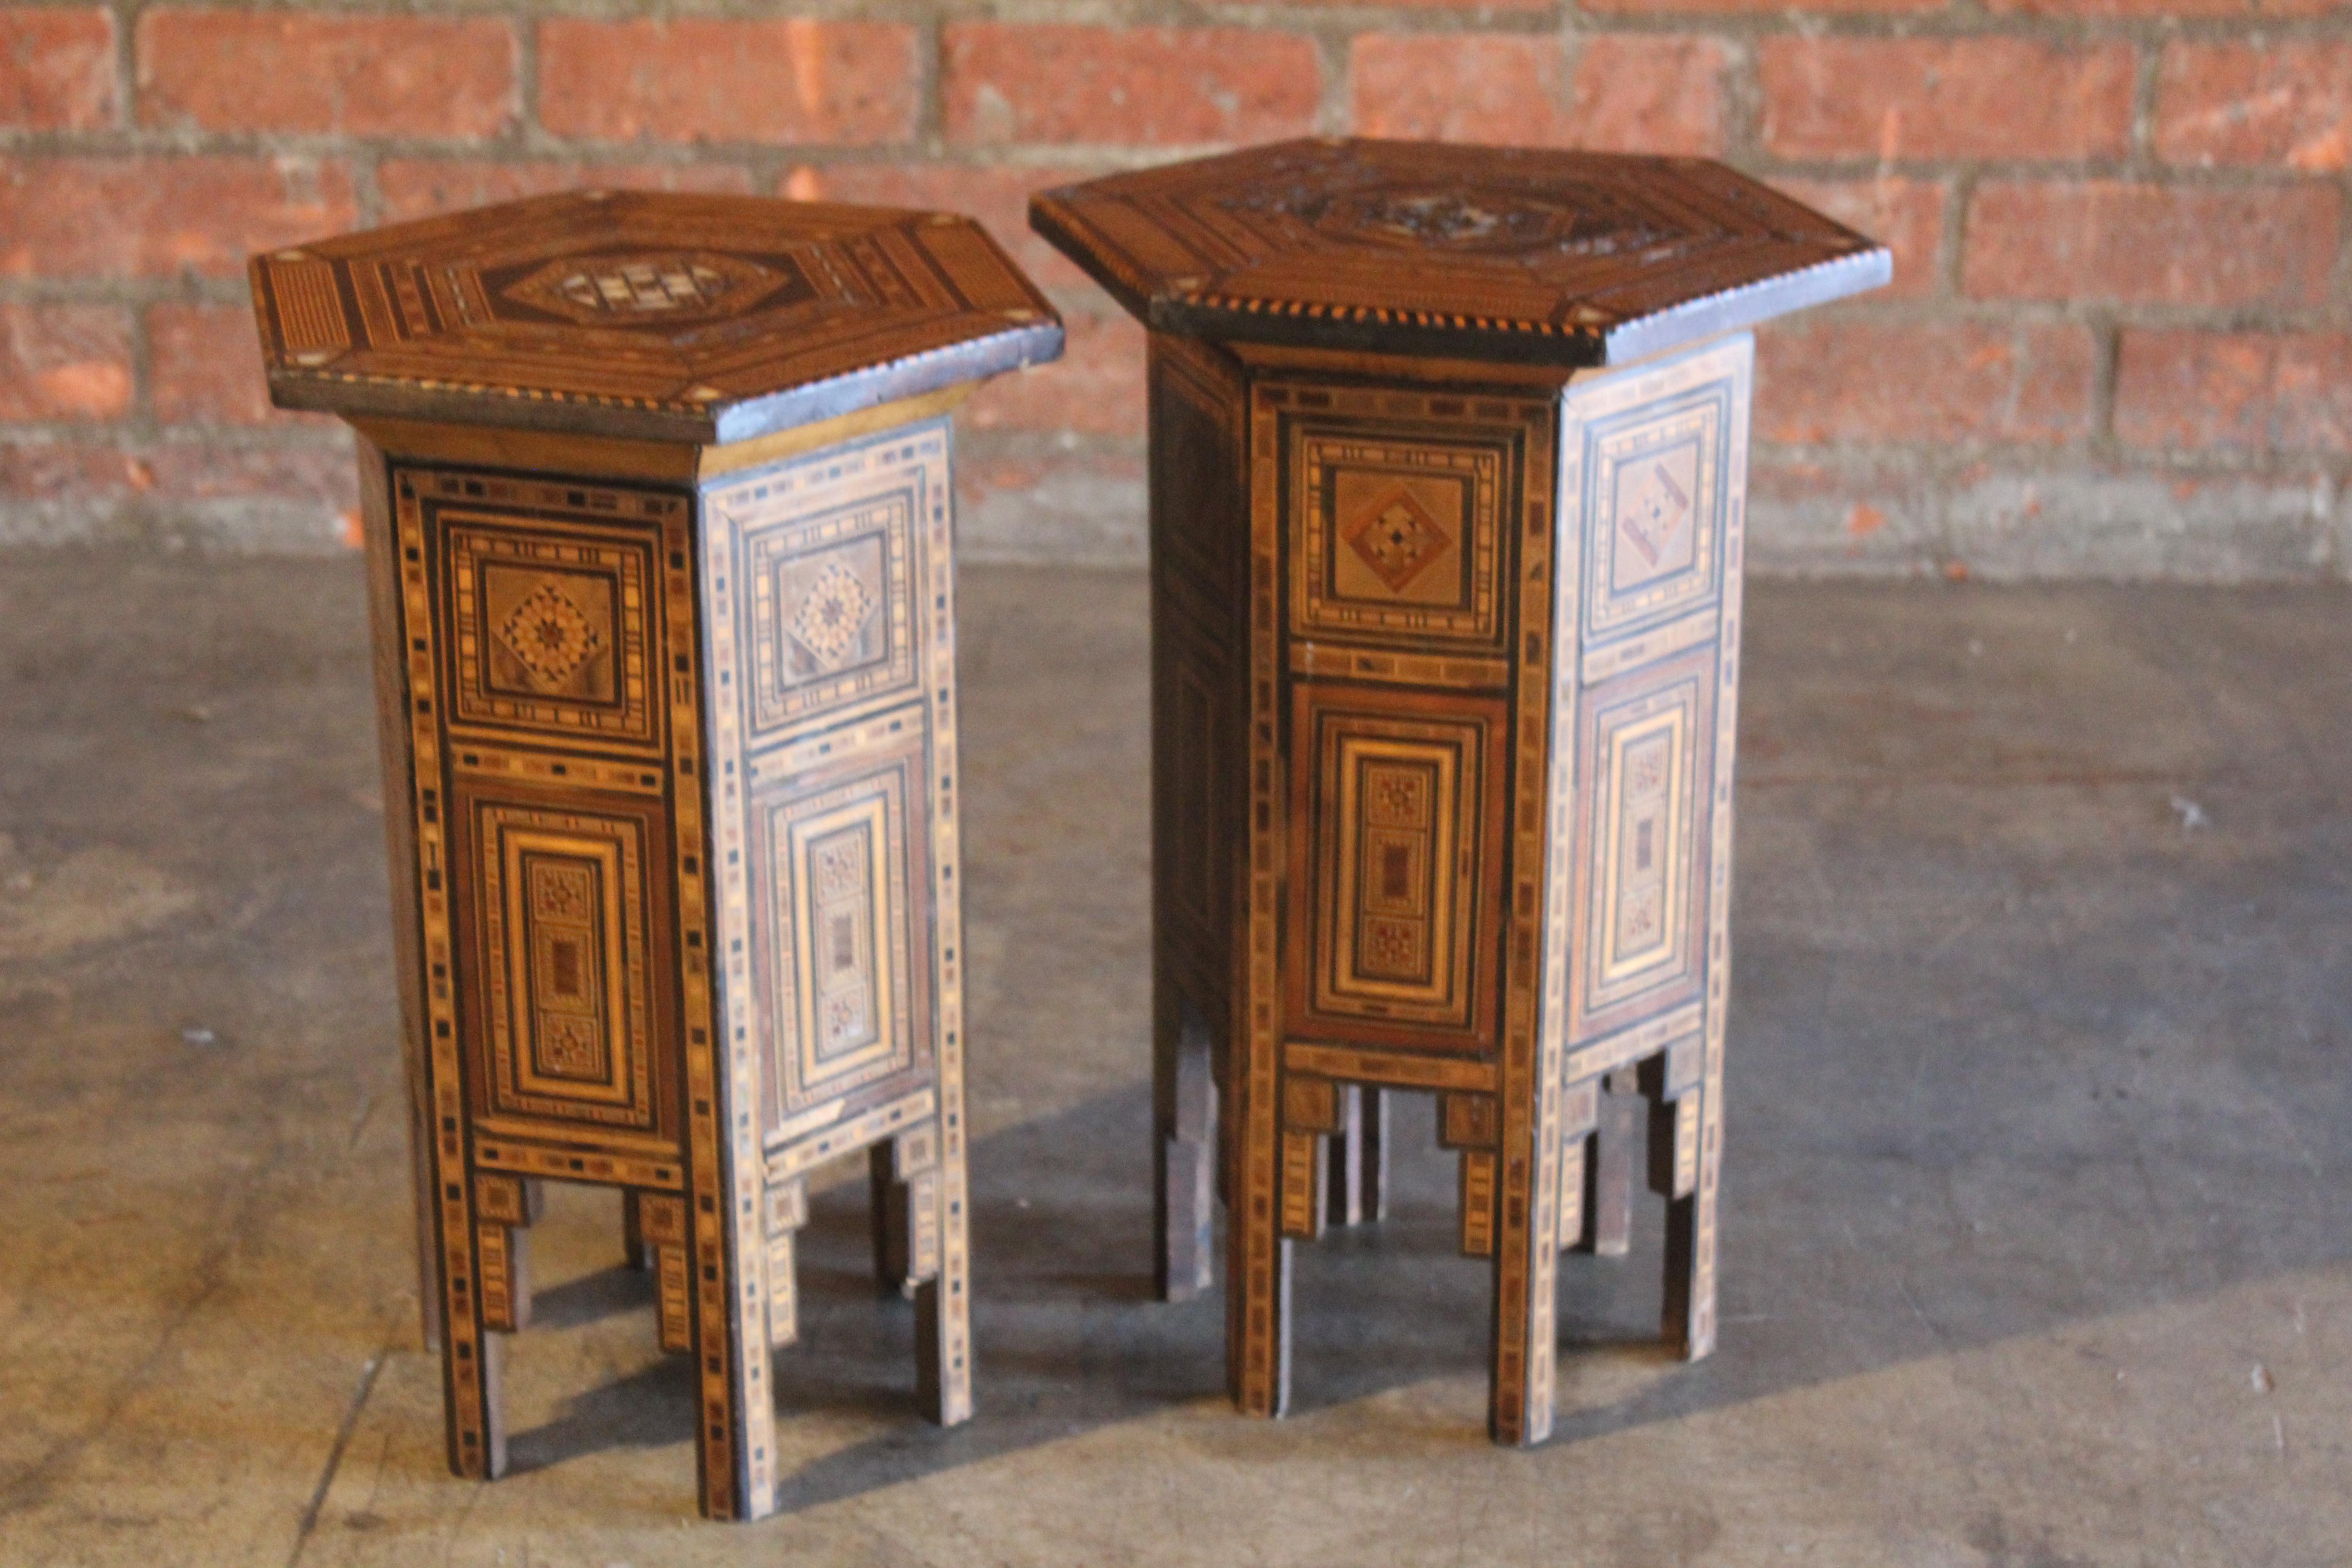 Pair of antique 19th century Syrian side tables. In over all good condition, one table has been repaired and has damage on the top. The other table appears to be in good condition. Sold as a pair. Inlaid with different exotic woods. One table is 0.5